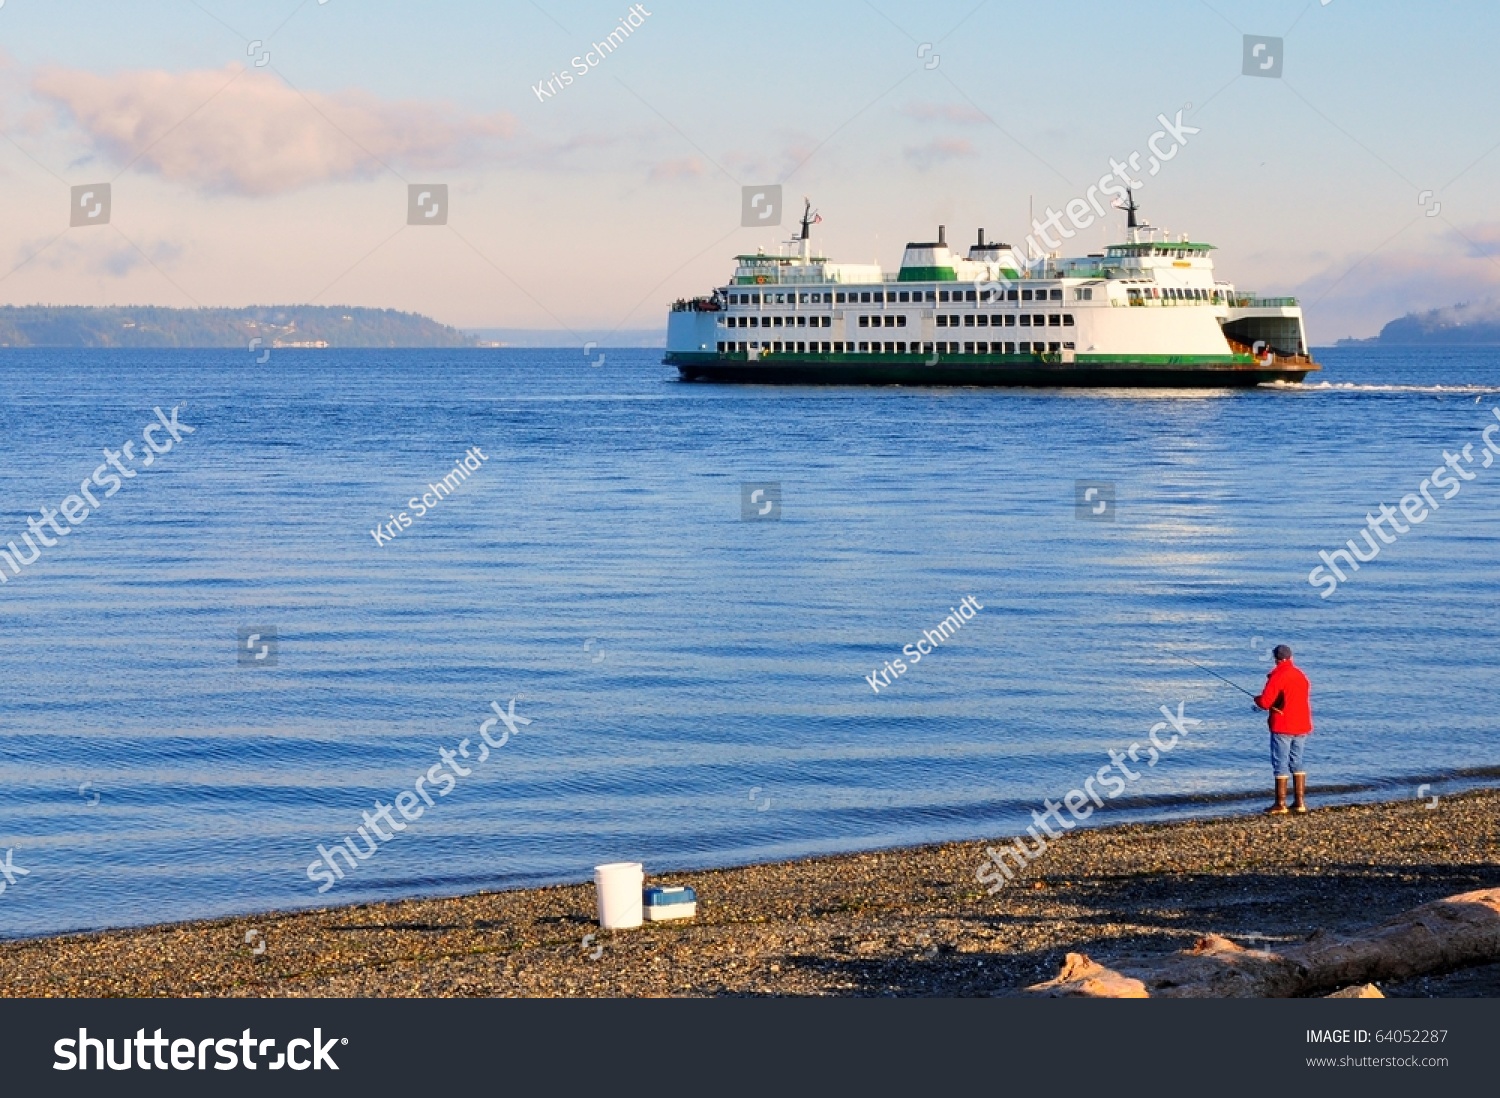 Automobile ferry crossing water with fisherman in the foreground #64052287